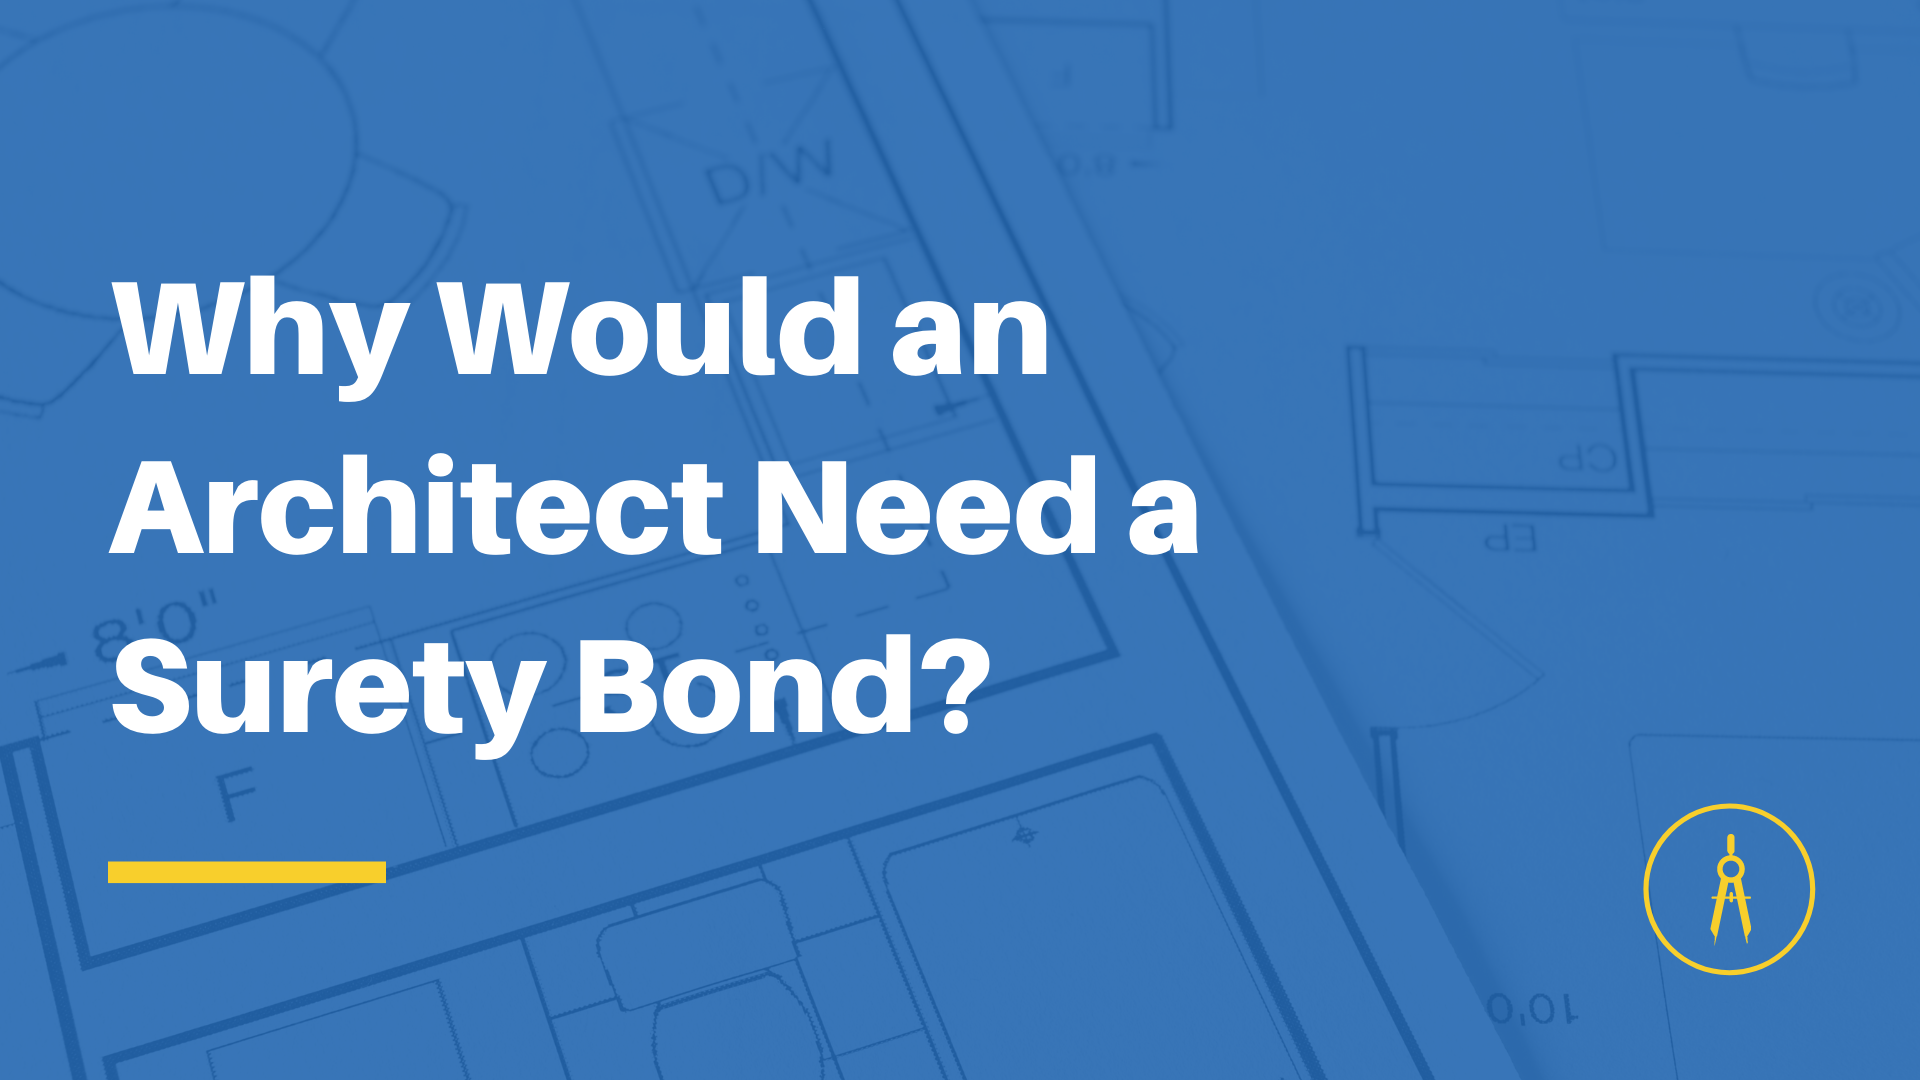 surety bond - Why is a surety bond needed by an architect - building plan in blue shade